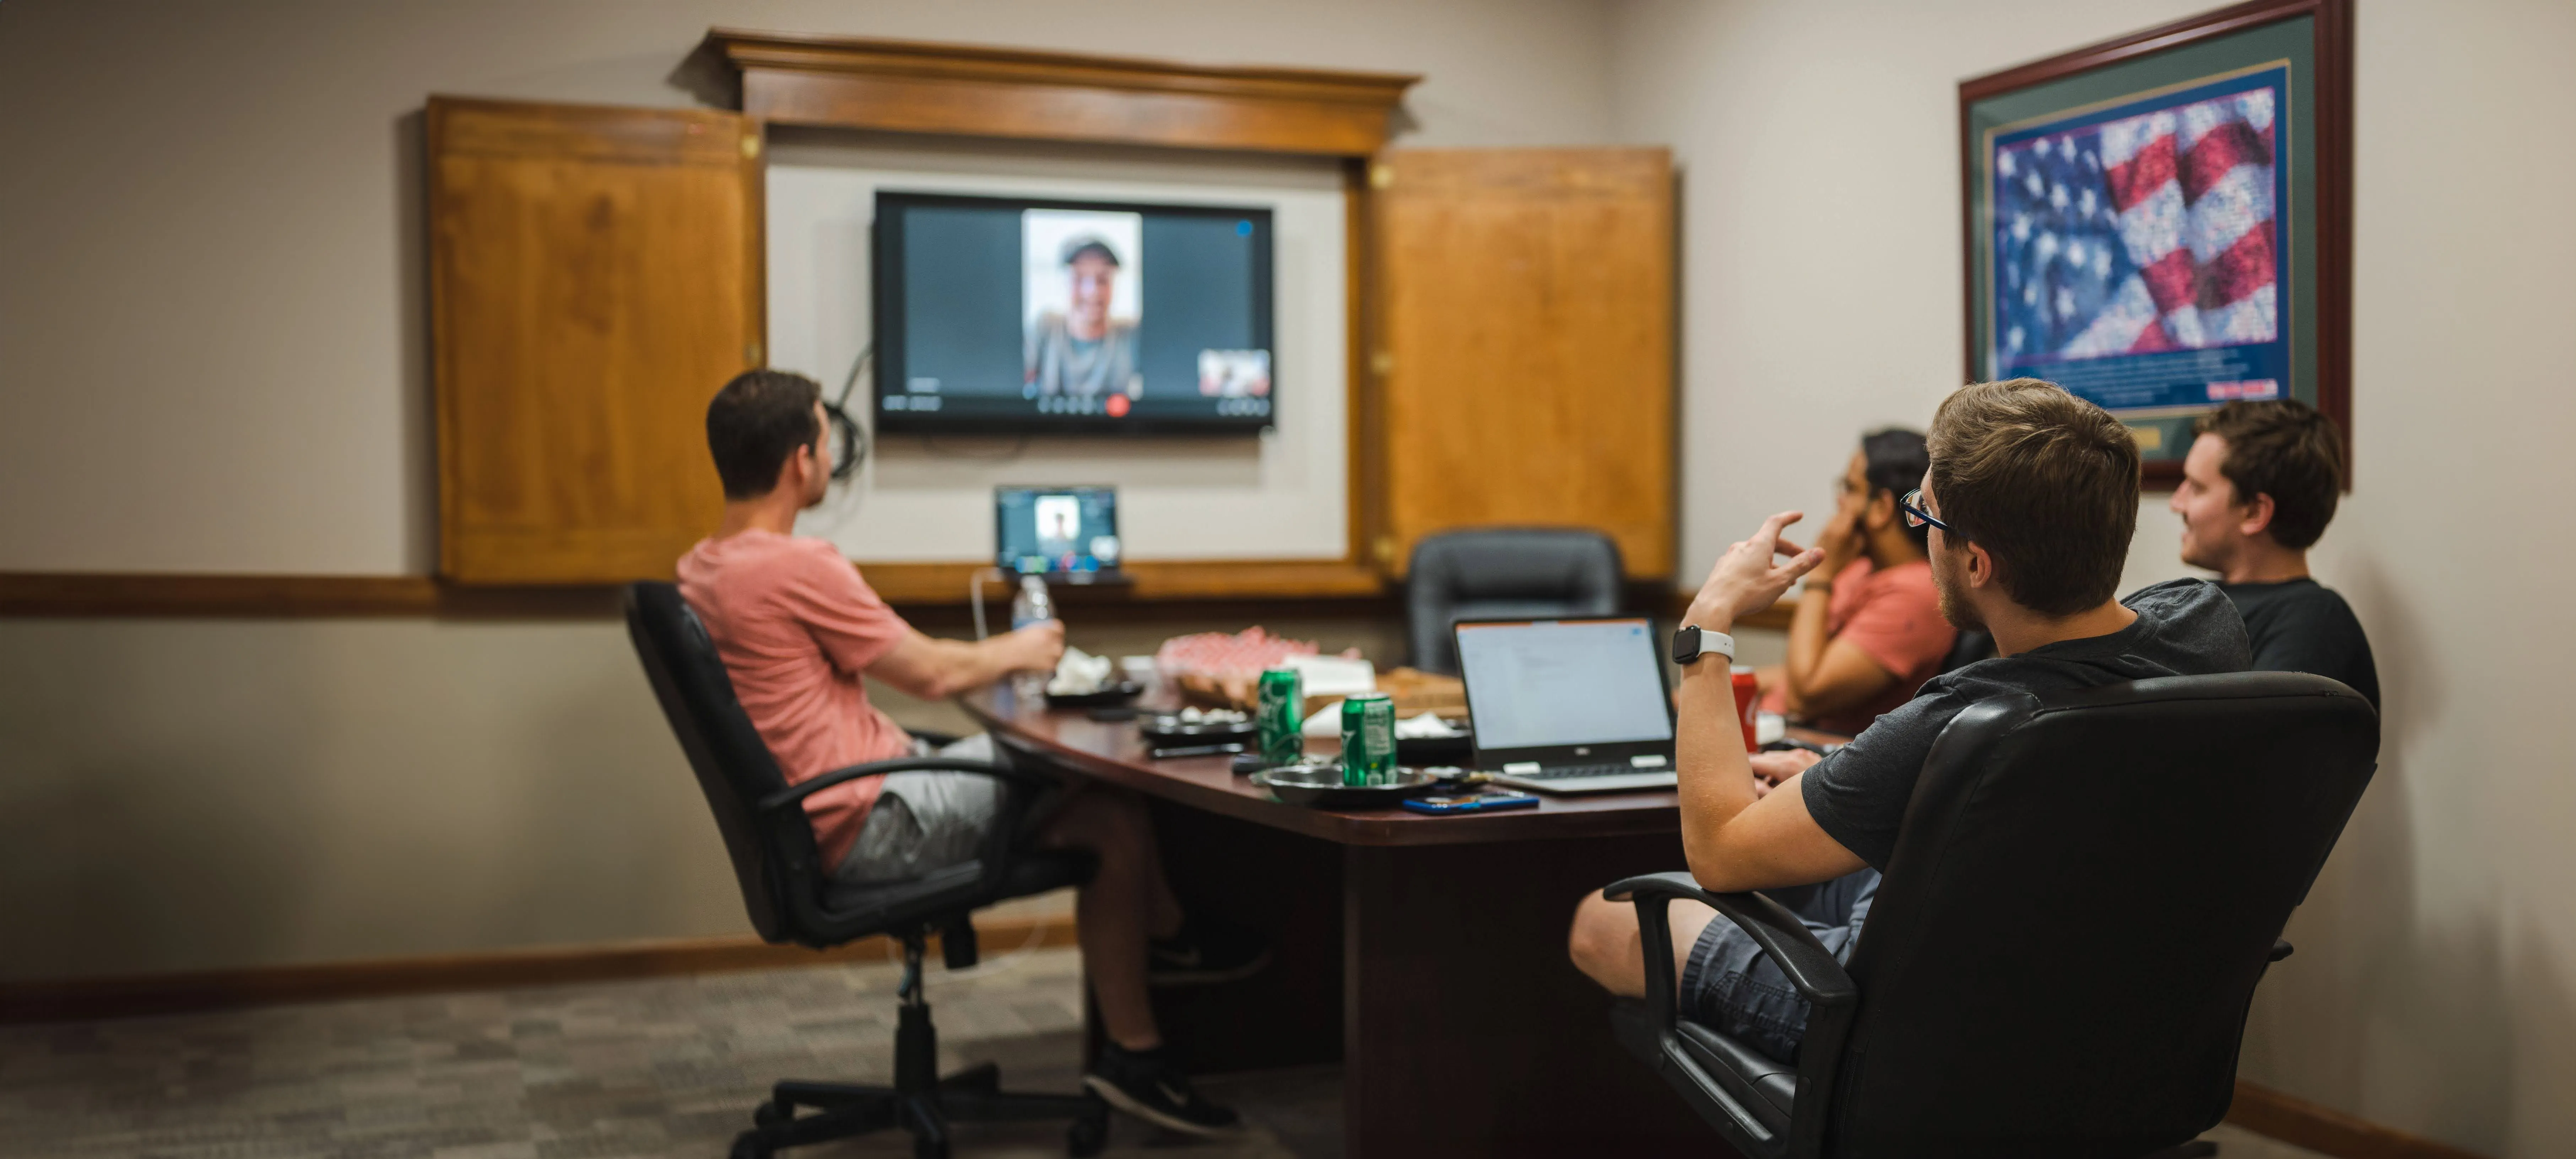 Group of people in a conference room engaging in a video call with a person displayed on a screen, with snacks and laptops on the table.